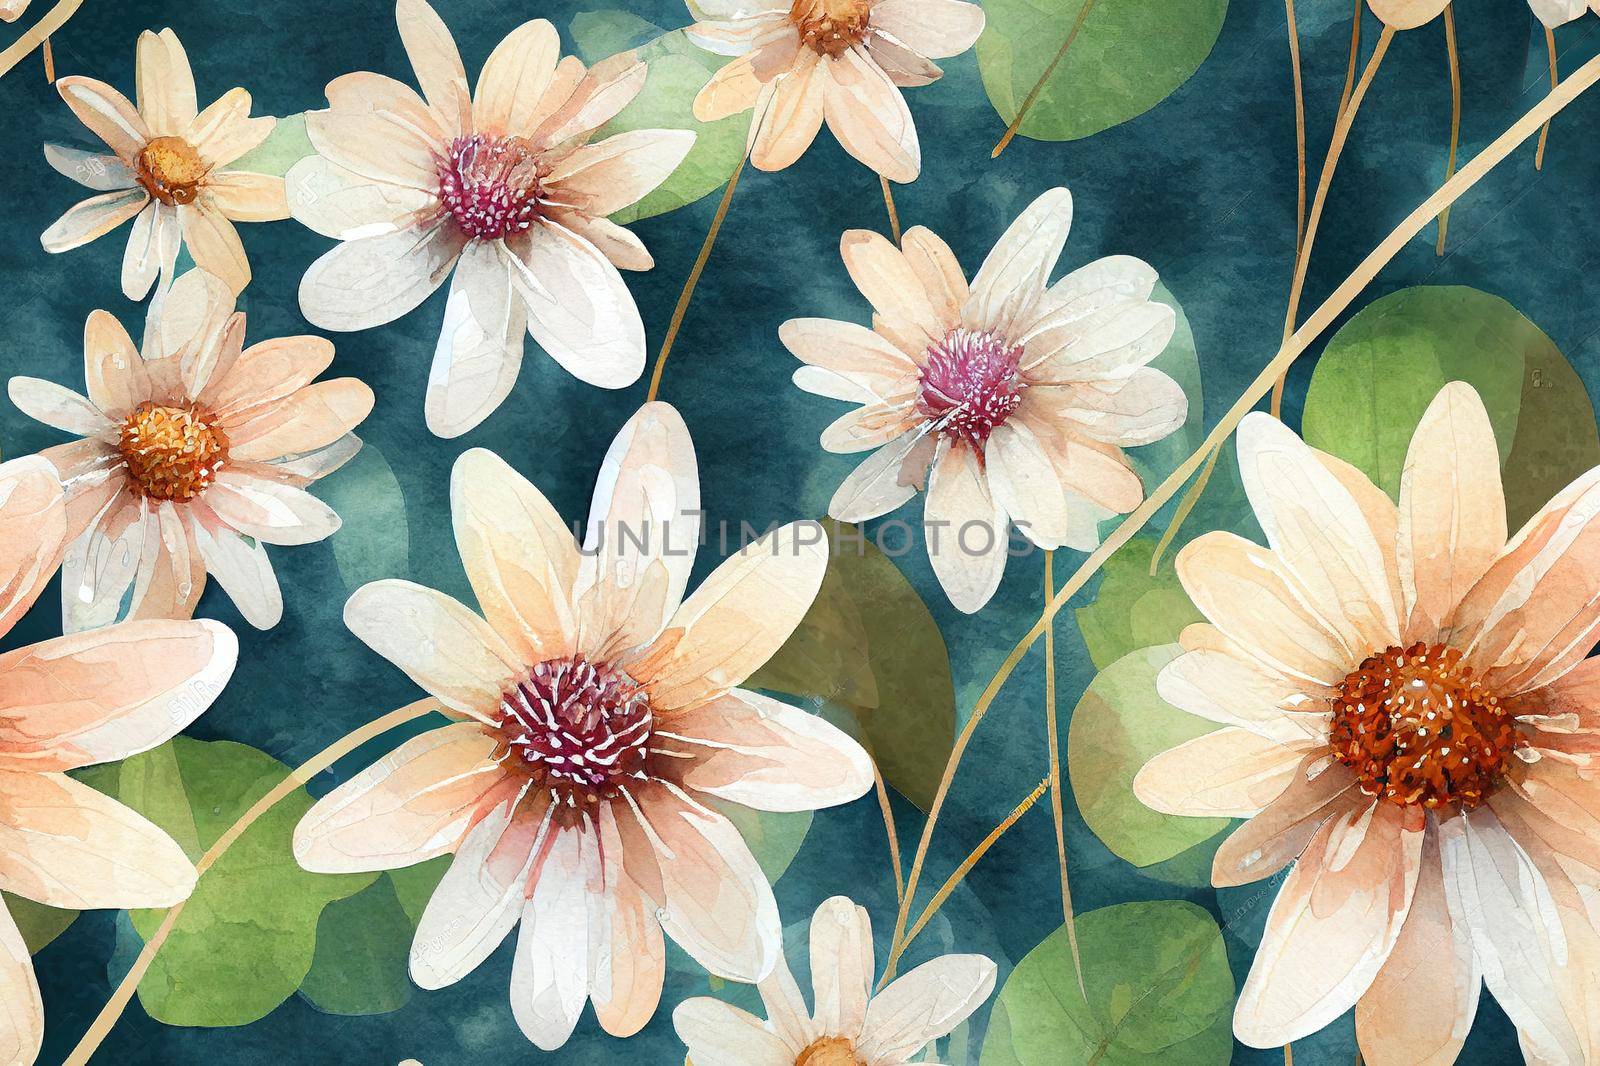 Watercolor autumn seamless pattern of aster, dahlia, rose, leaves and dry grass. Hand painted meadow flowers isolated on white background. Floral wild illustration for design, fabric or background.